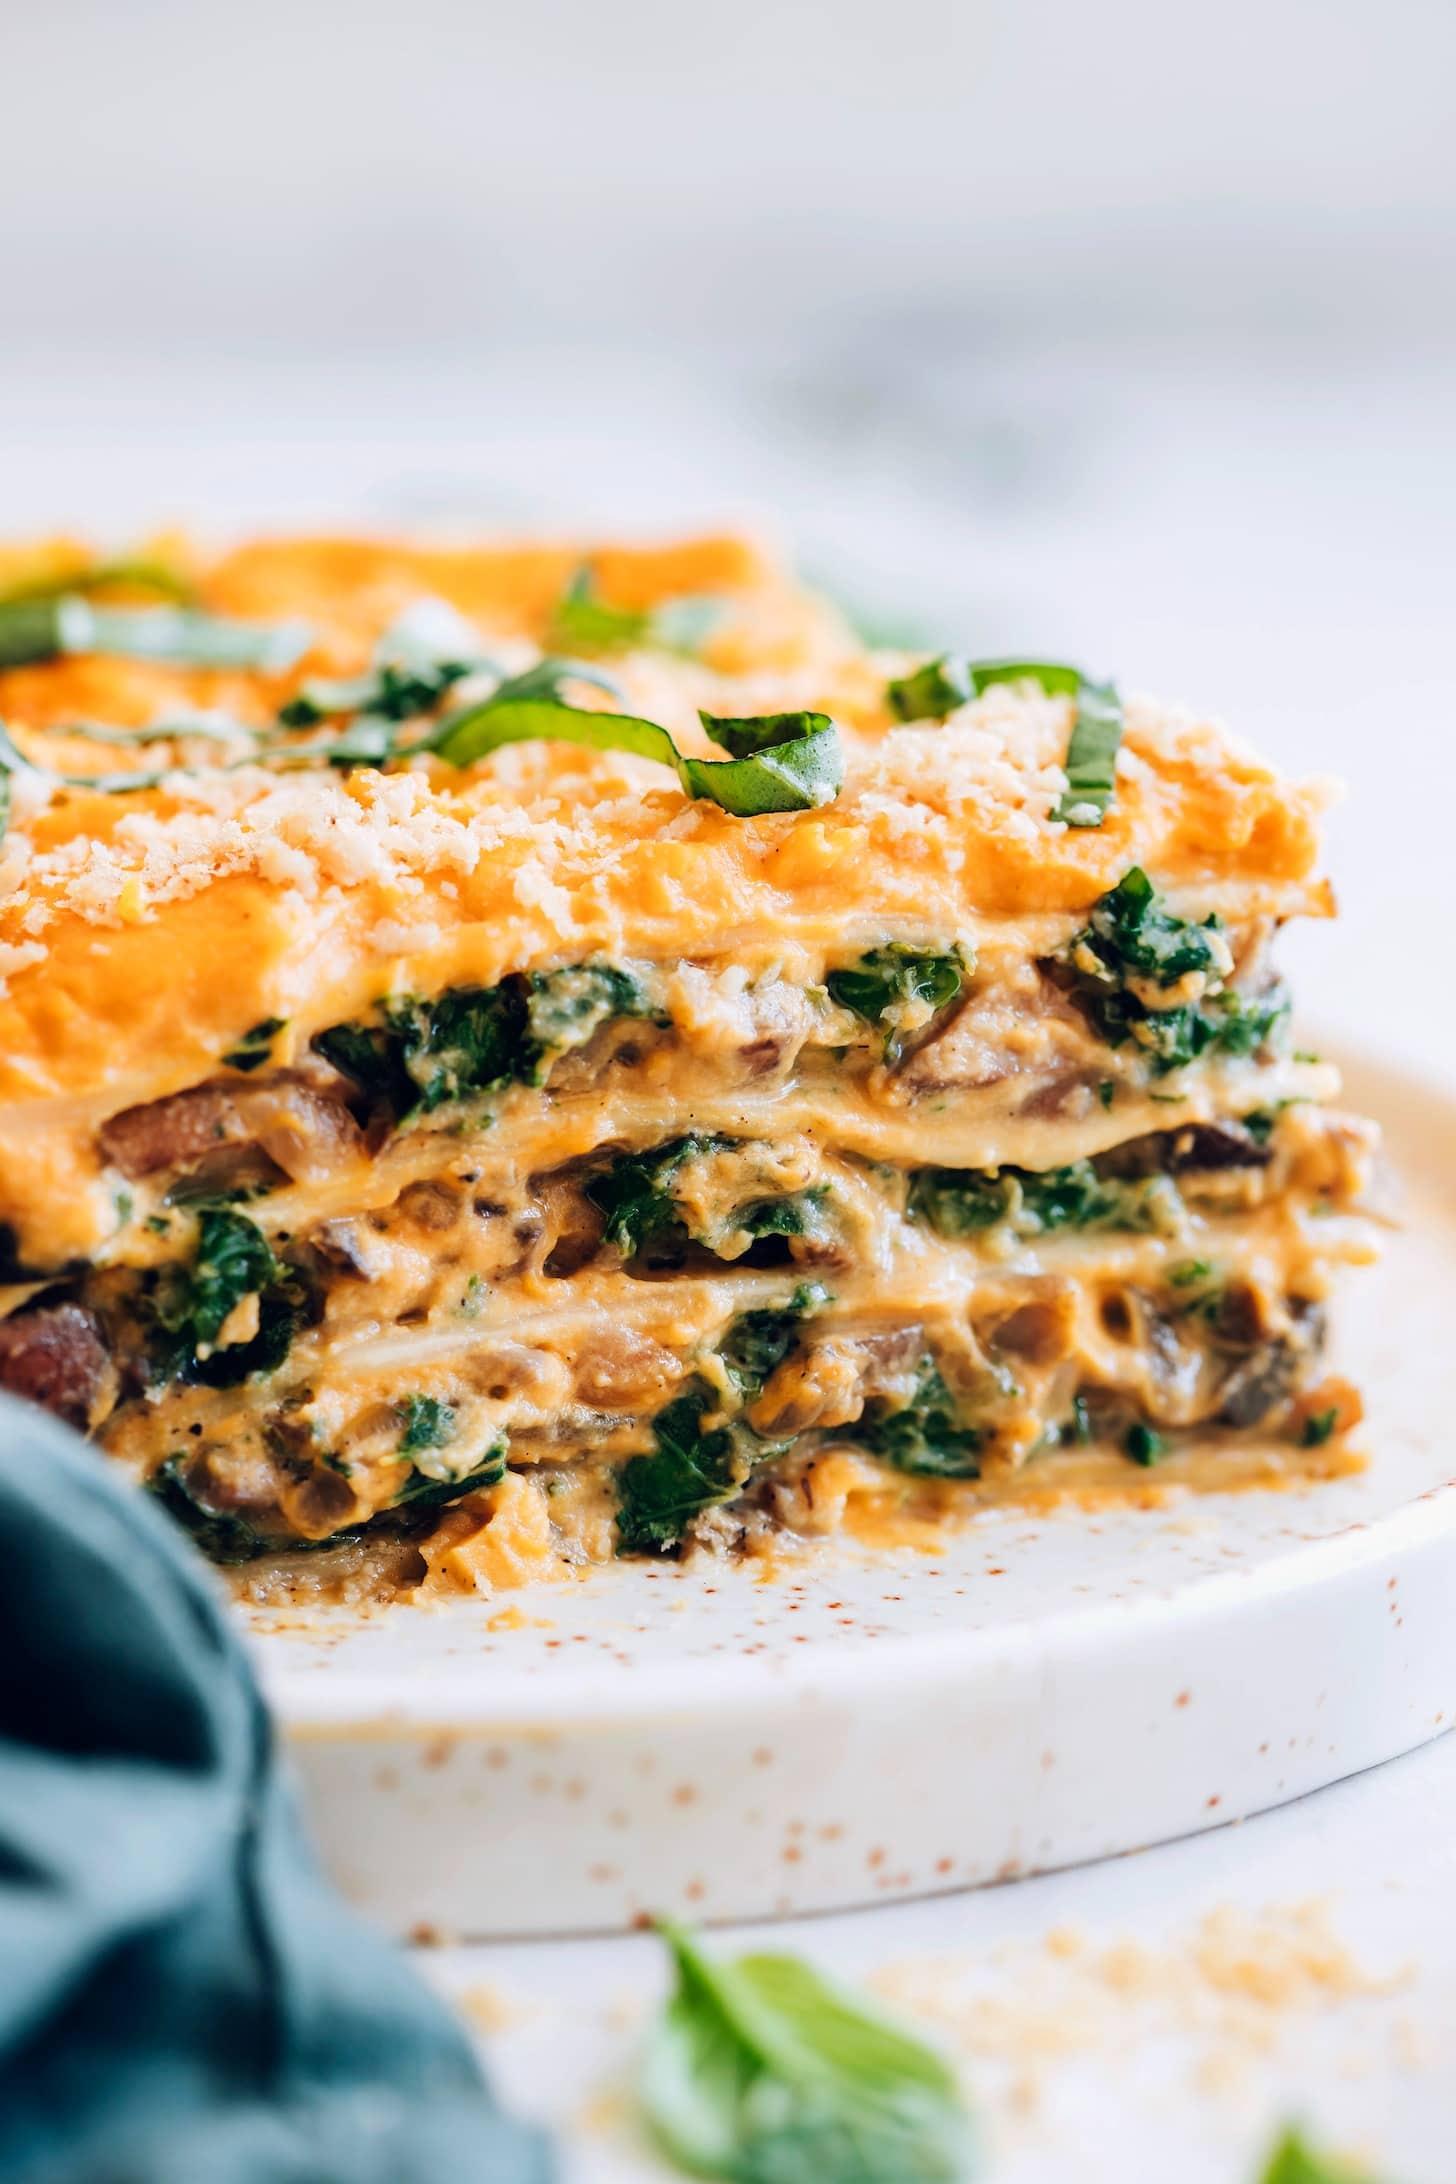 A slice of vegan lasagna with spinach and mushrooms served on a white plate.